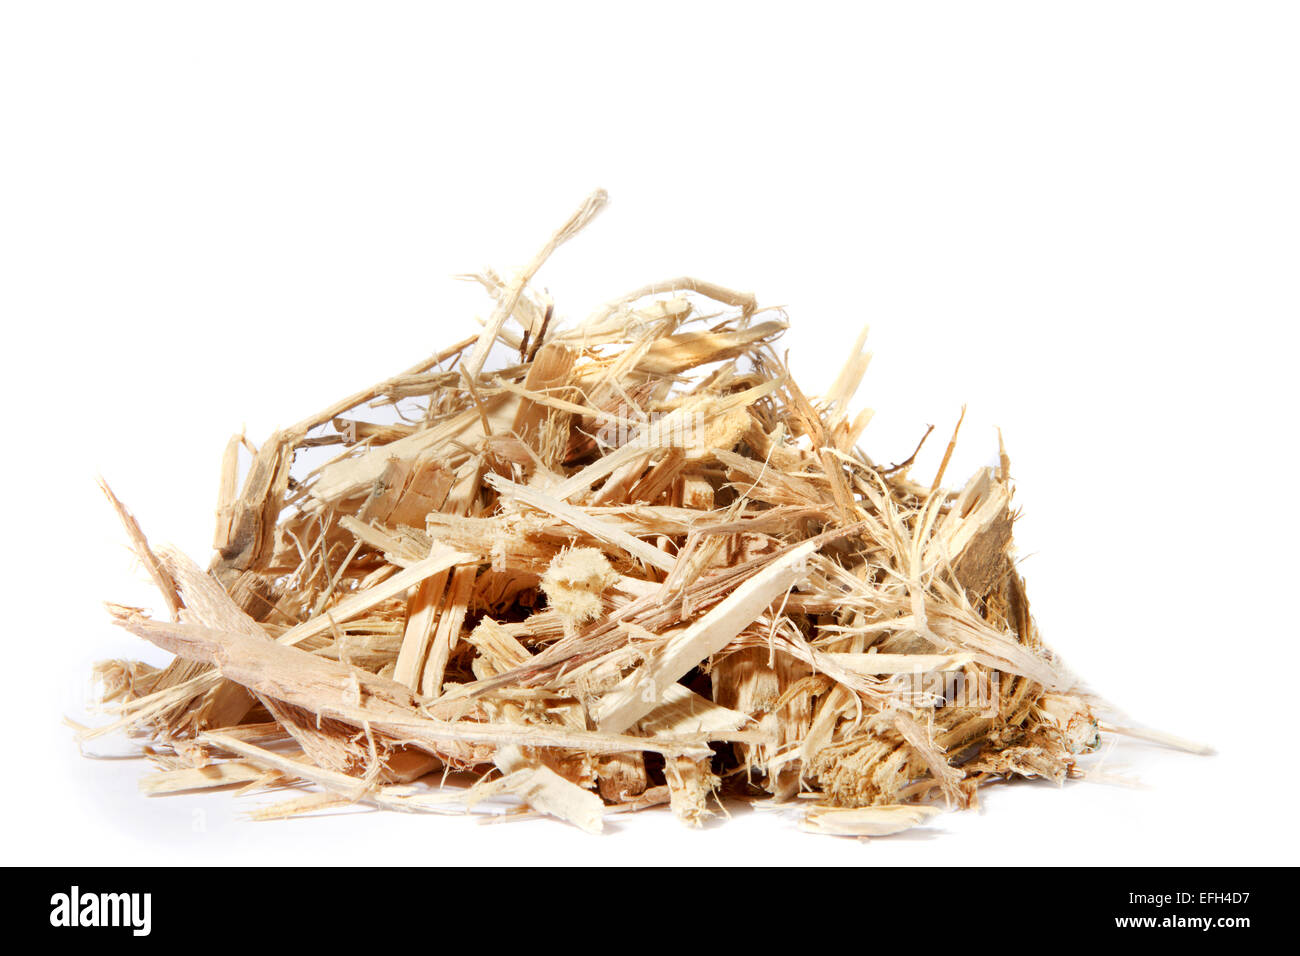 Forestry waste wood shavings for biomass Stock Photo